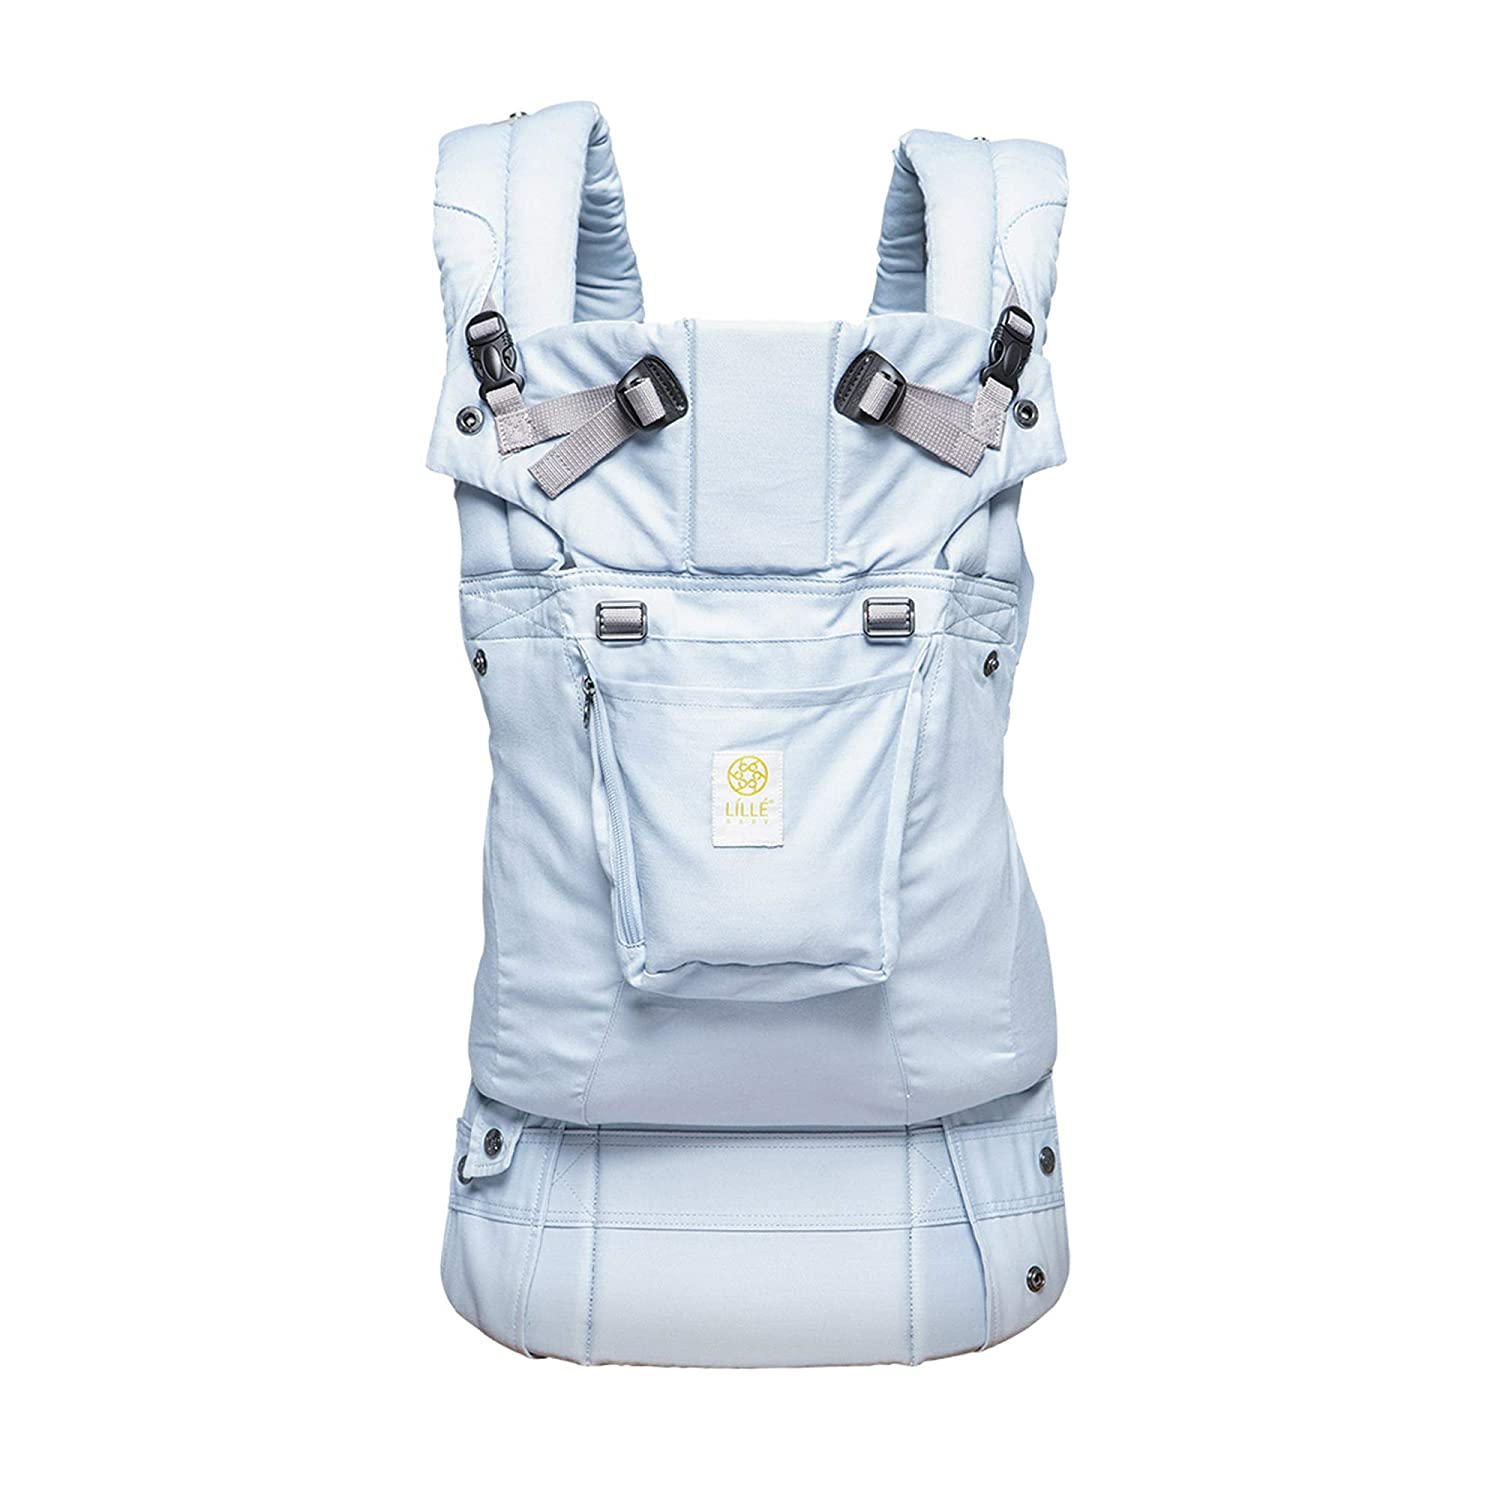 Lille Baby Organic Carrier’s - Powder Blue